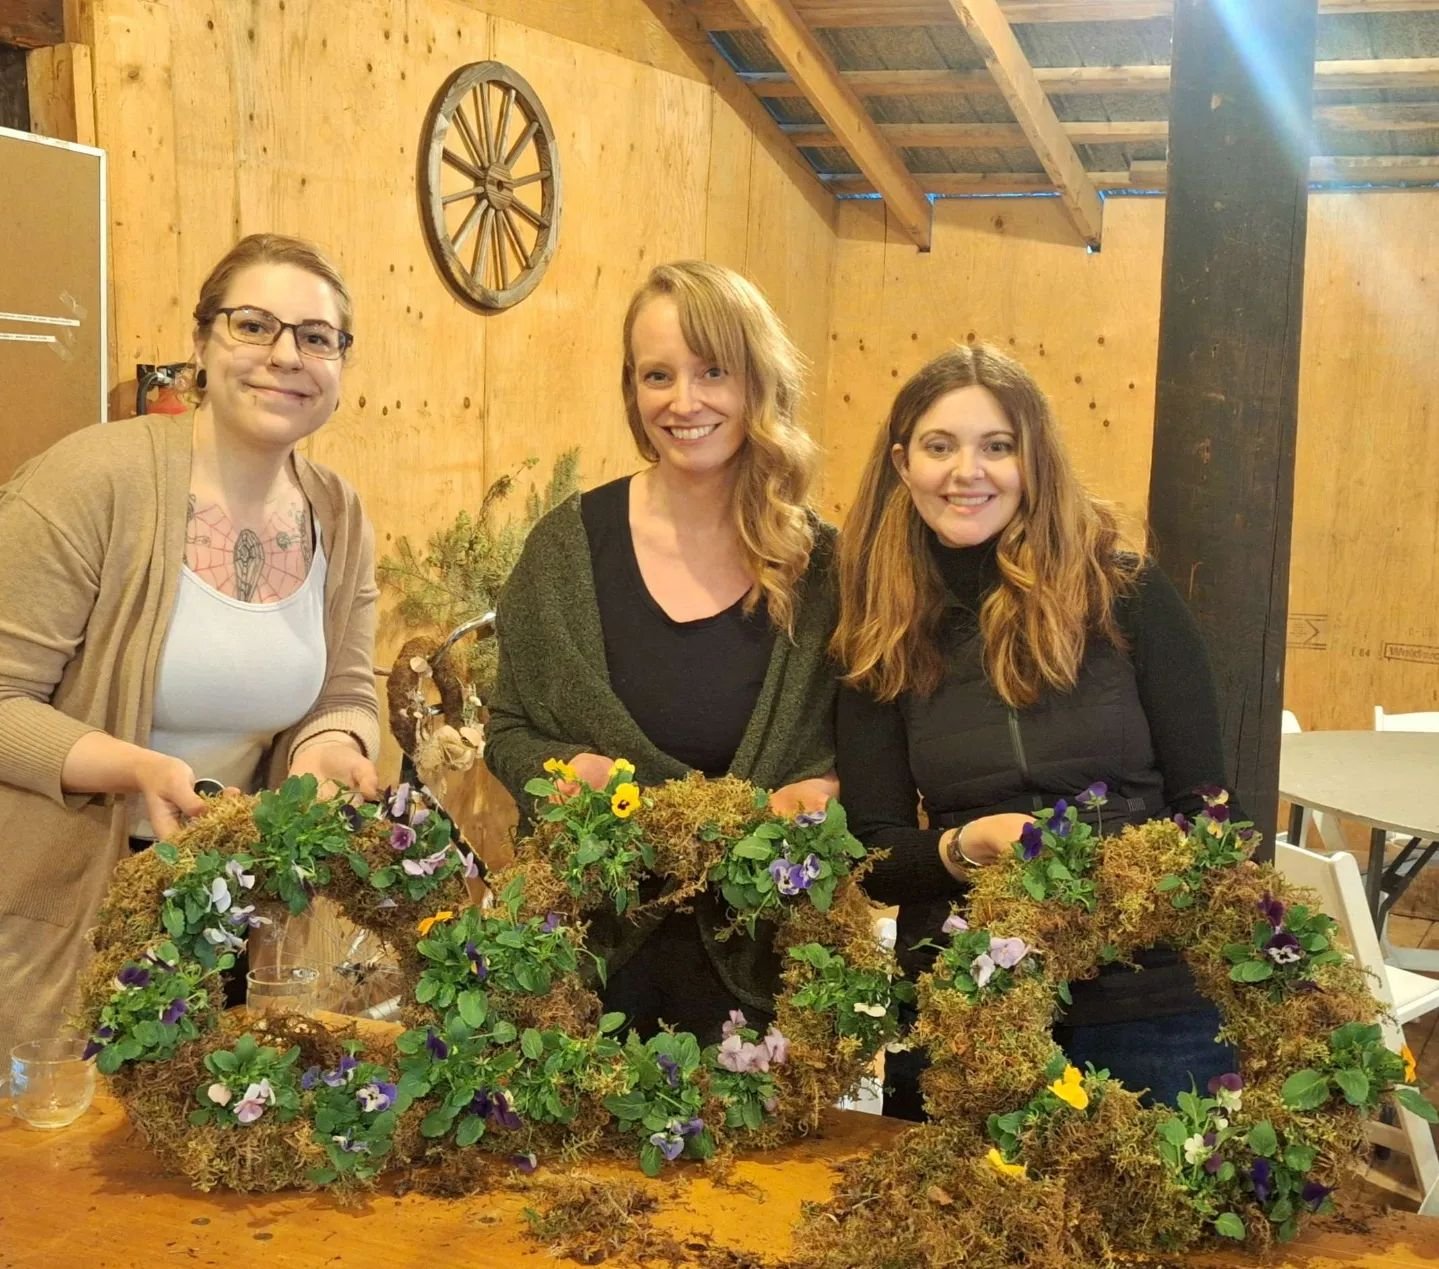 Had a wonderful evening with my ladies at @wildflowerfarmpg, creating this beautiful piece of art! T'was gifted by mother nature to grace our doorways! 🌱🌷💚

I highly recommend checking out their socials for future classes, or for their beautiful b